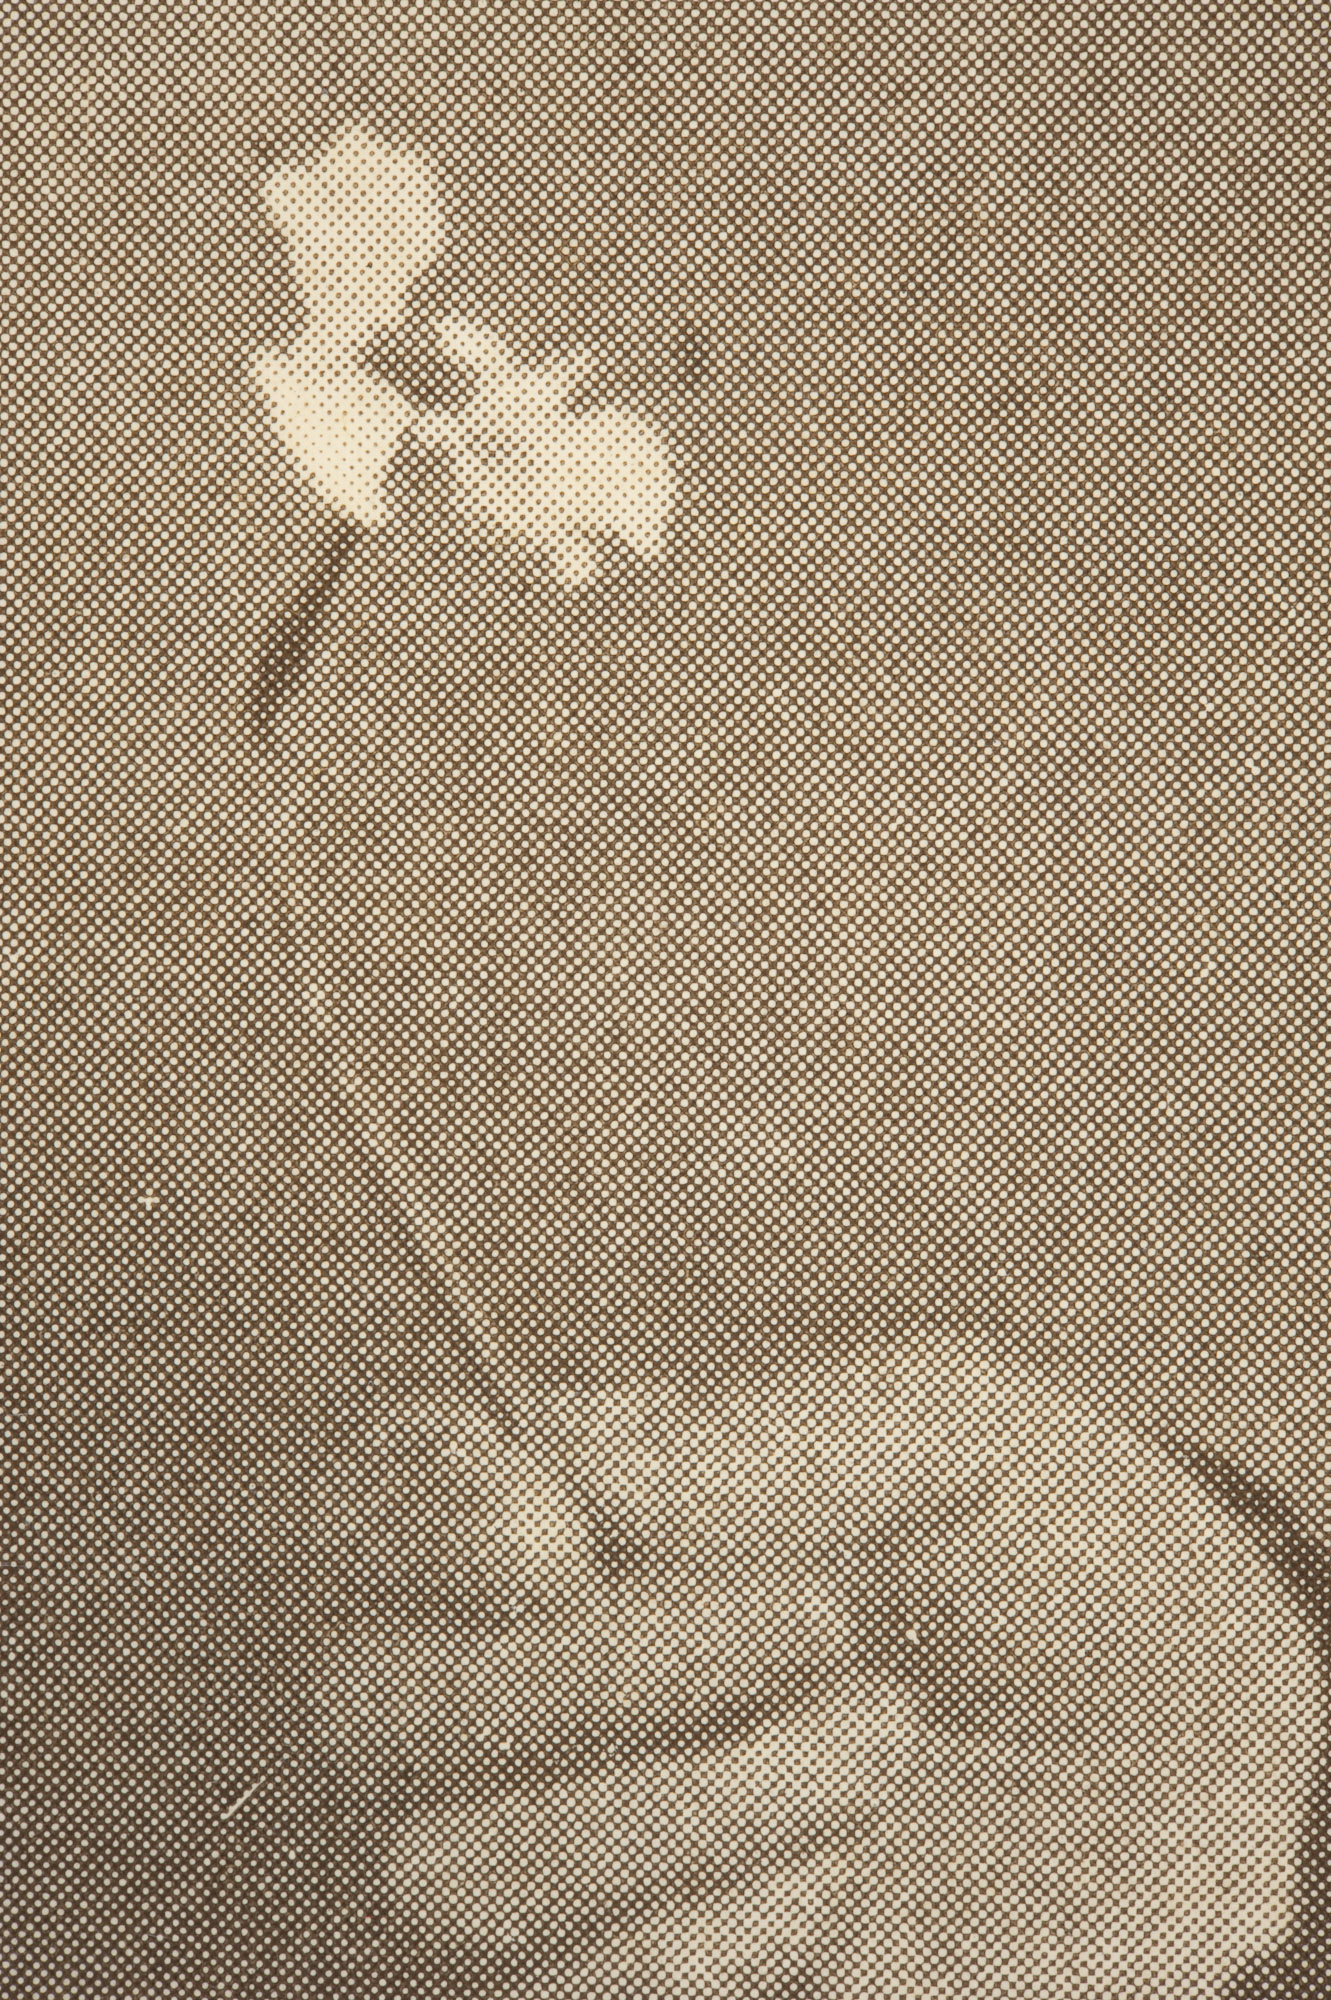 Half-tone screen detail of "The Narcissus," by H. H. House, page 49